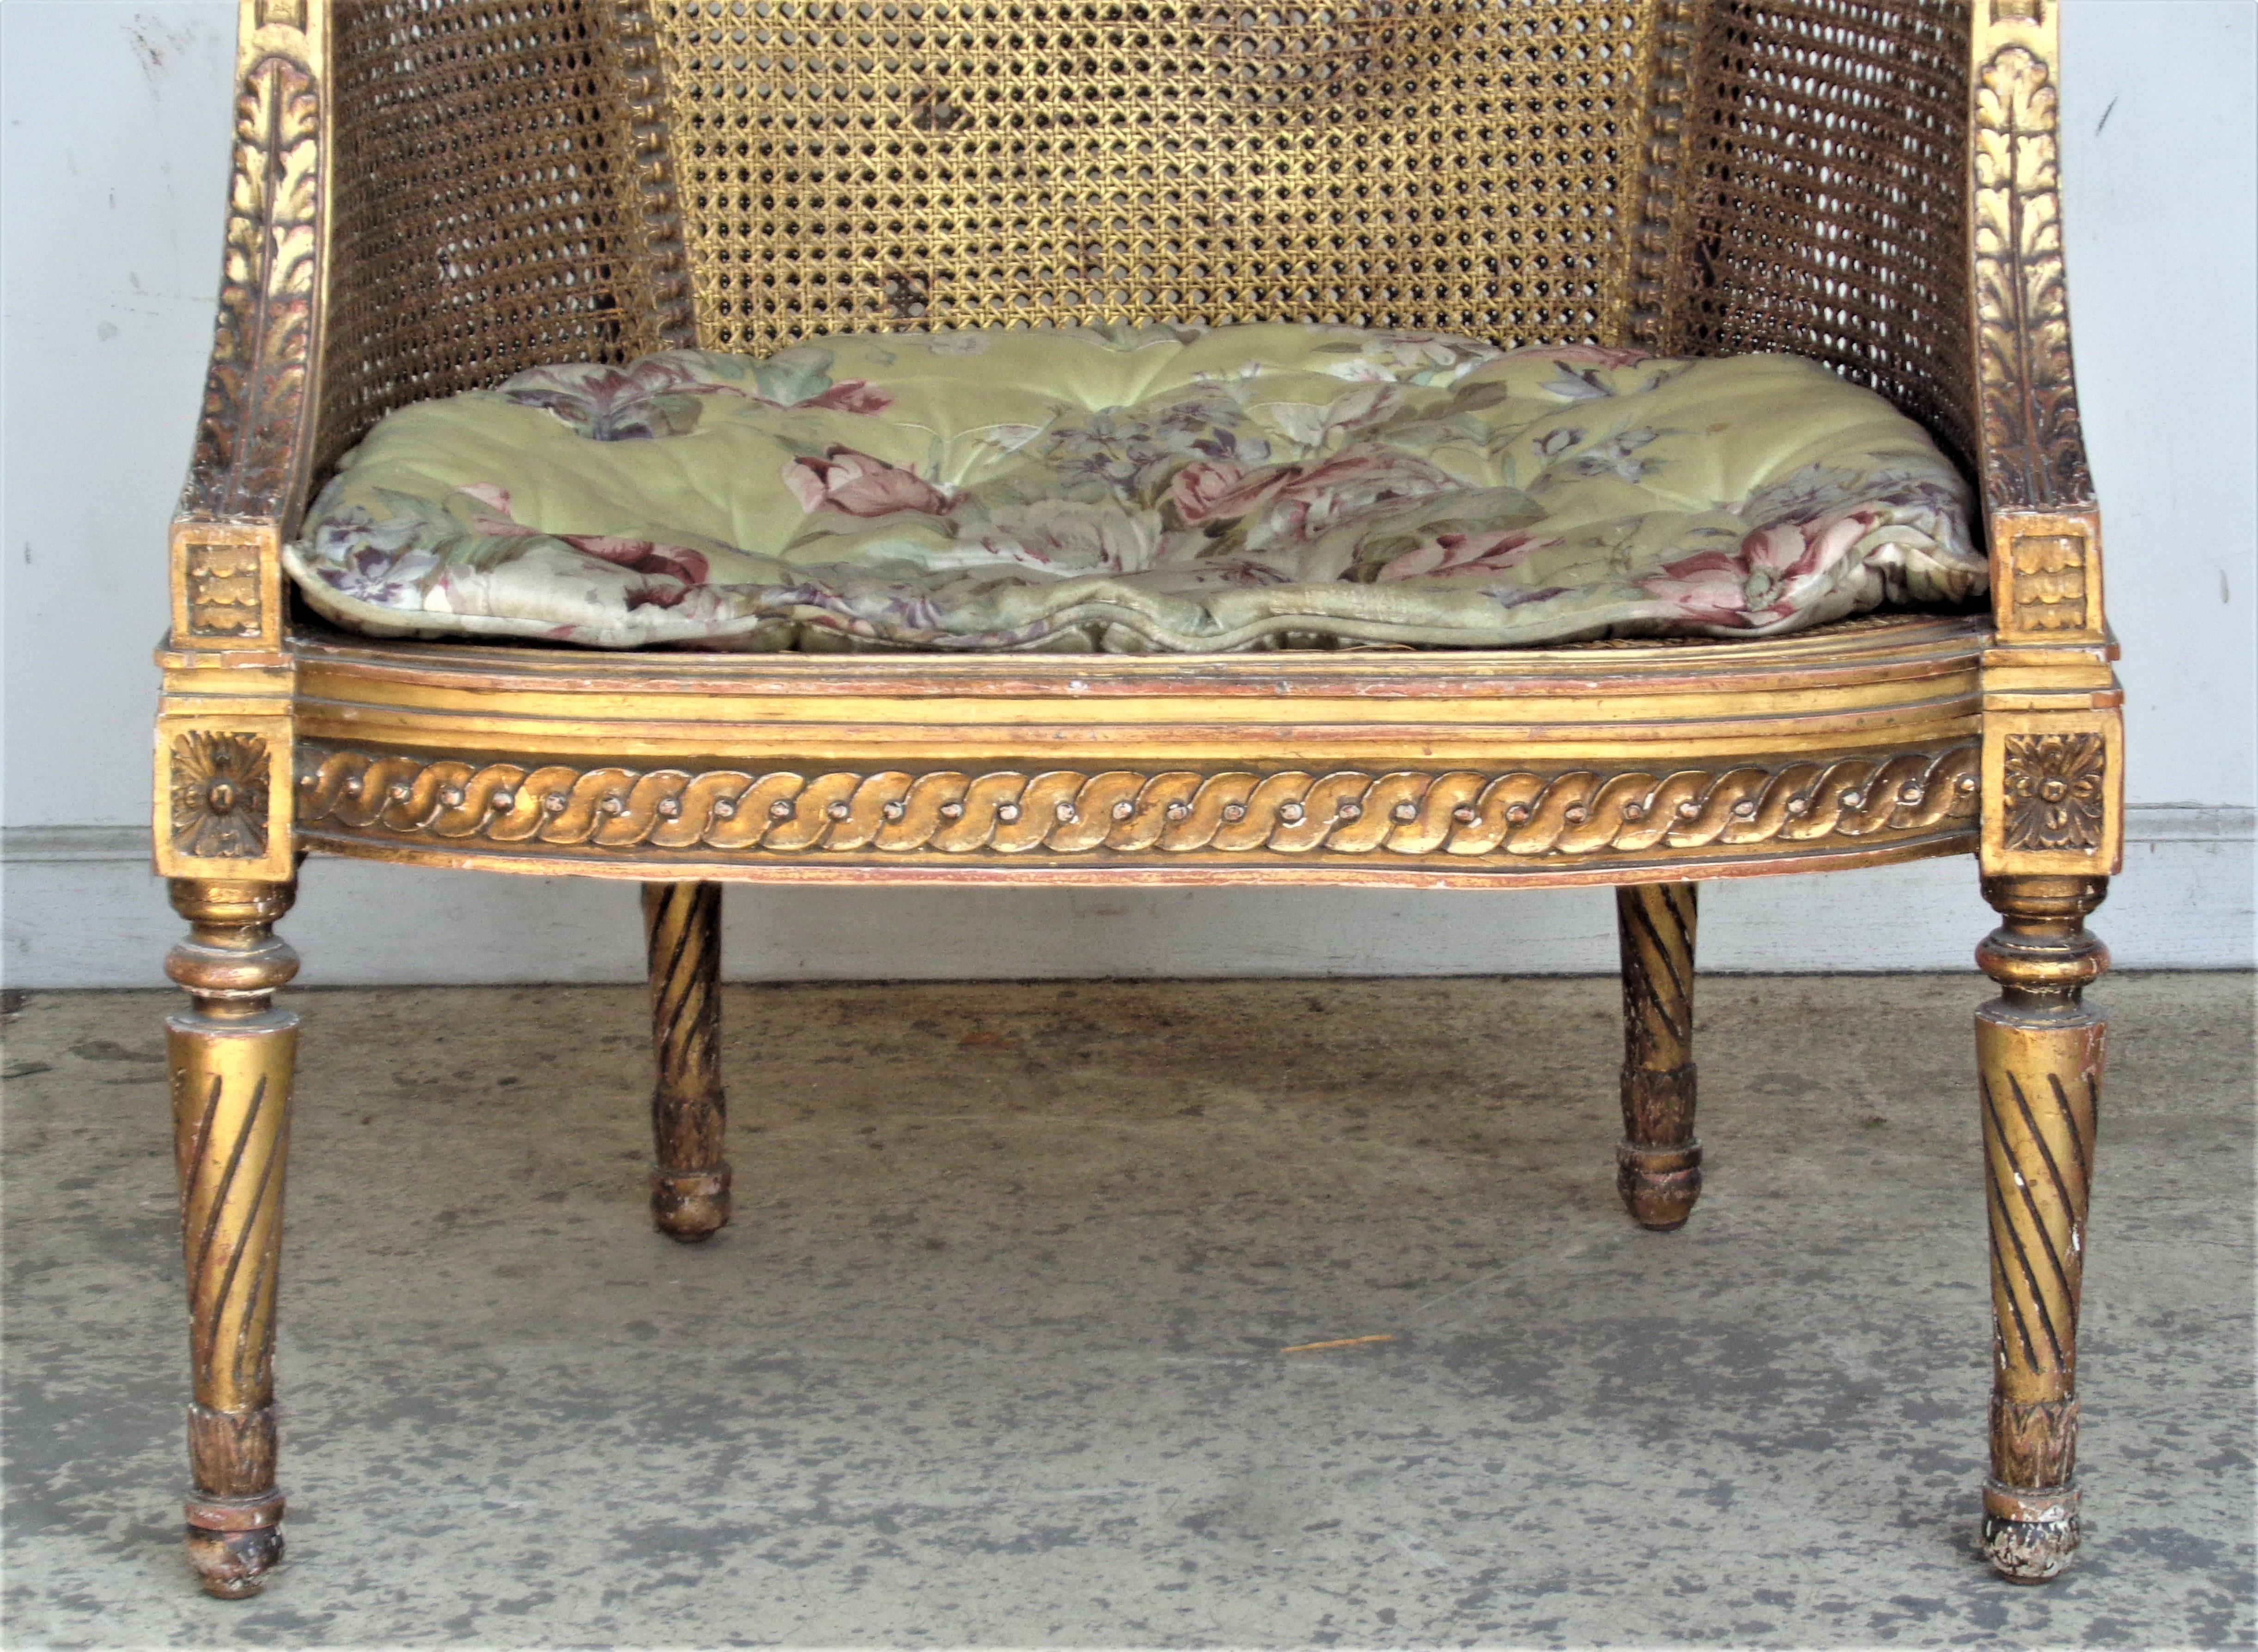 Antique 19th century French Louis XVI style giltwood bergere with a finely carved frame in overall beautifully aged original gilded surface showing underlying areas of red bole highlights. The upper sides, back and seat with woven cane. Comes with